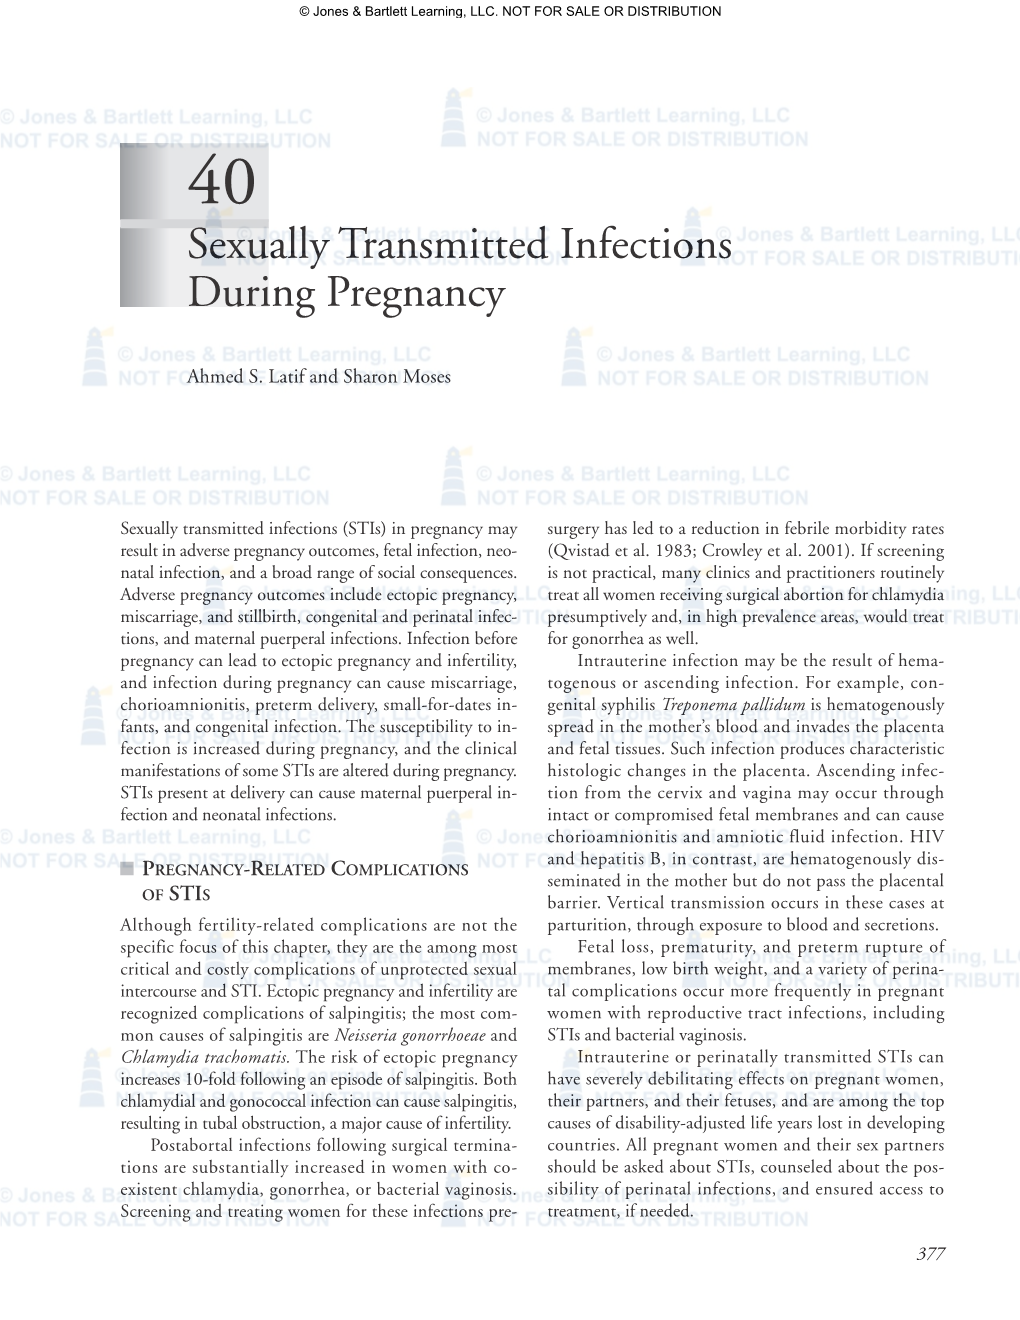 Sexually Transmitted Infections During Pregnancy